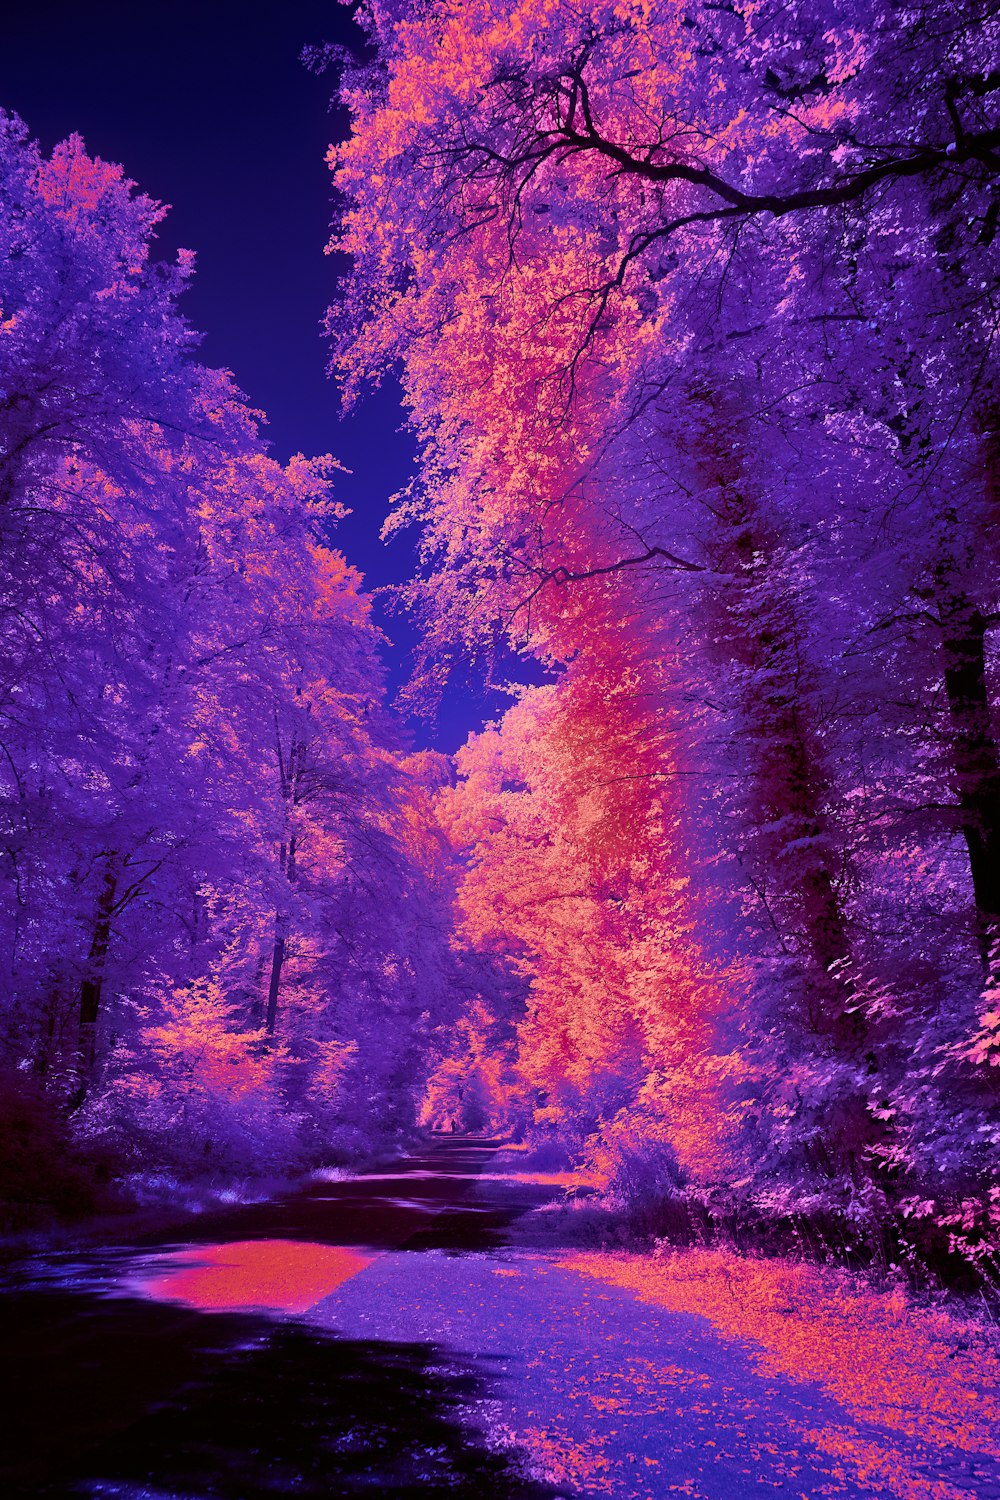 a group of trees with pink and purple leaves